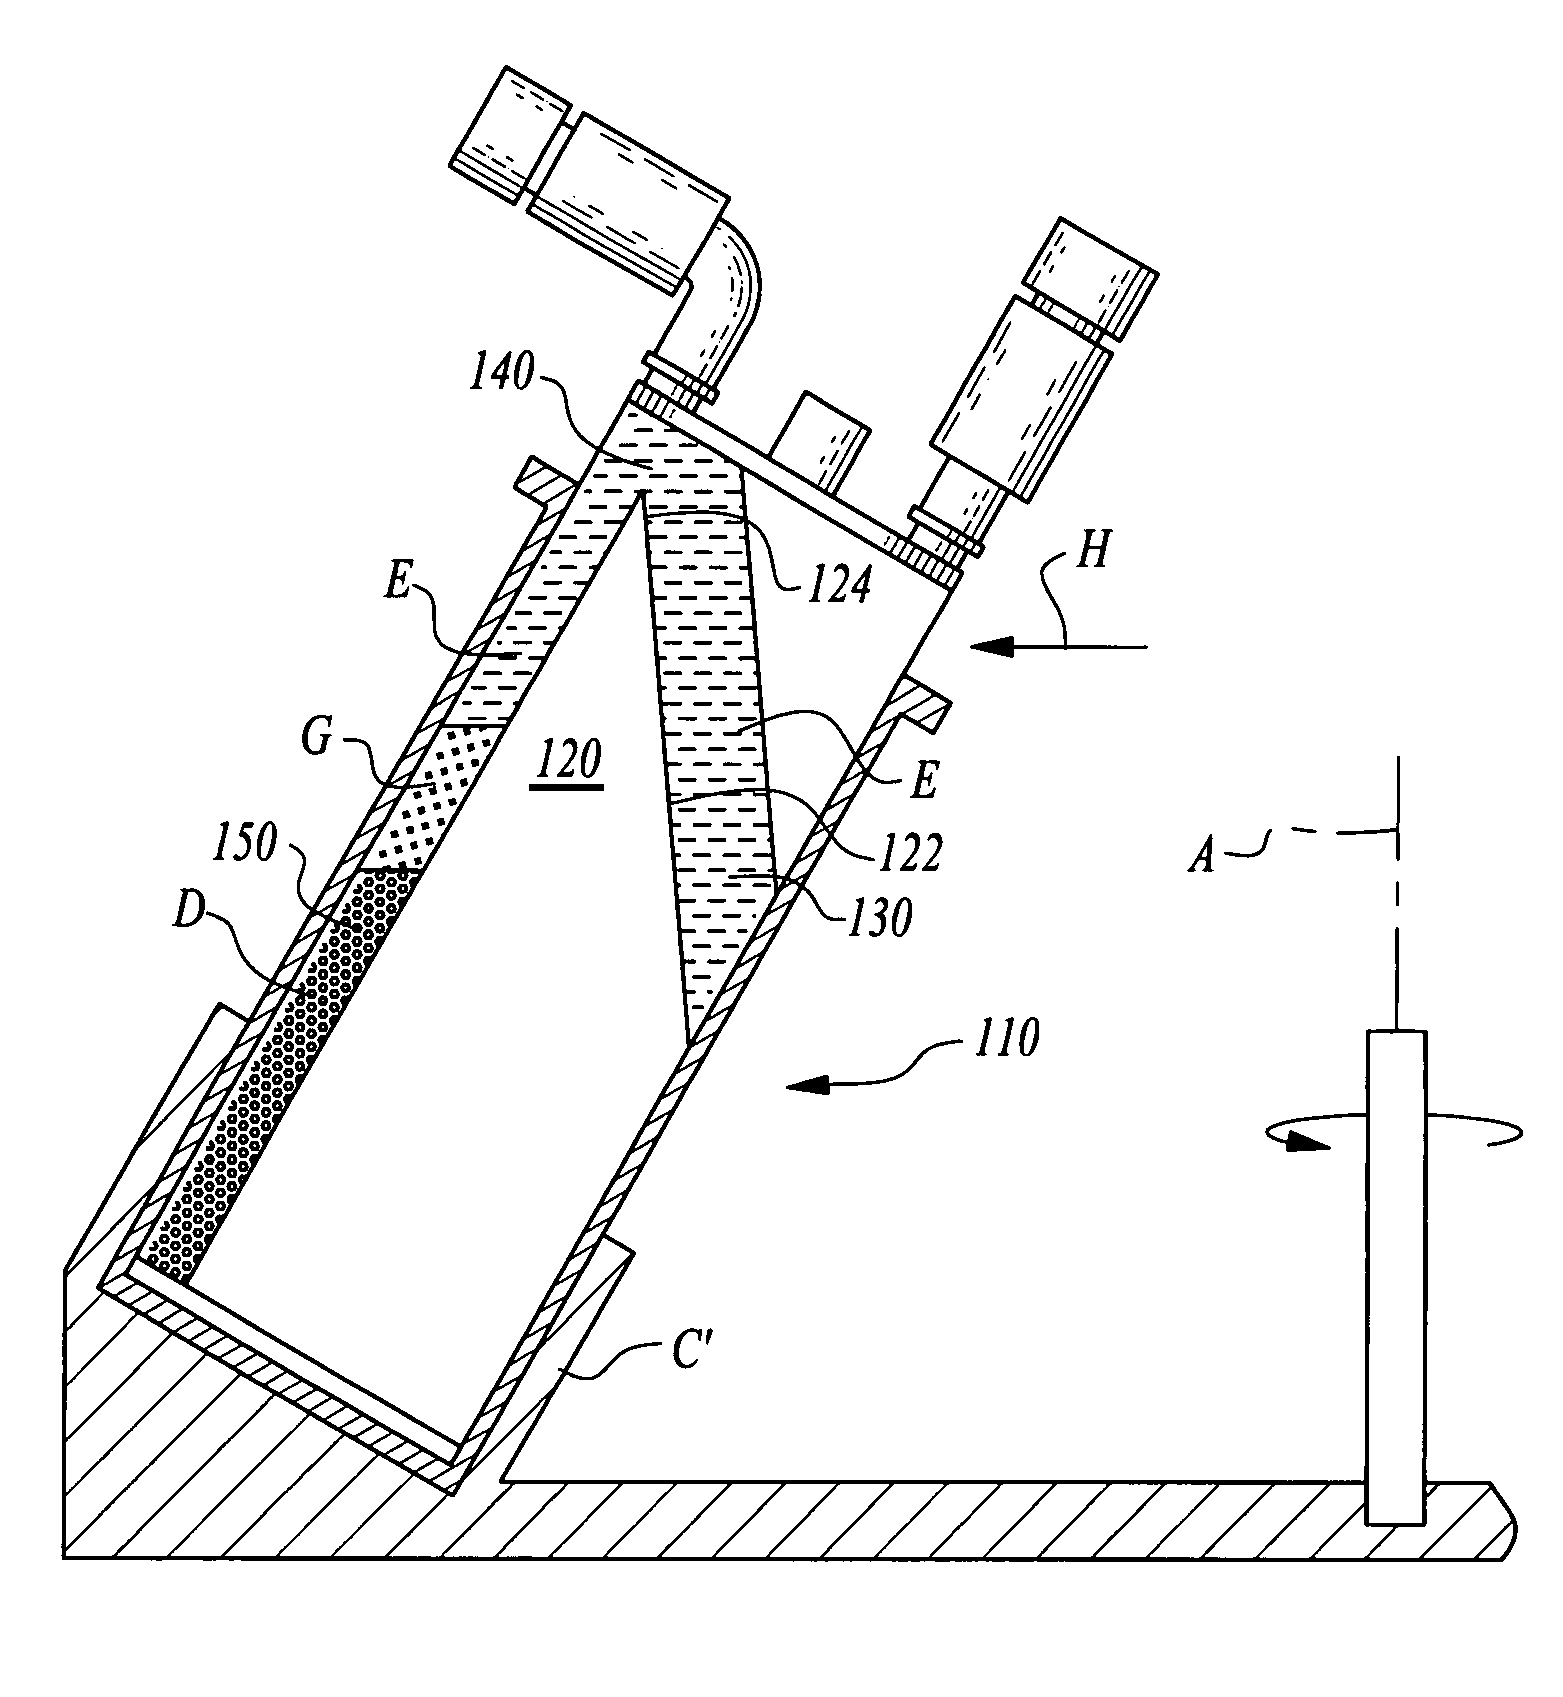 Method for separating a sample into density specific fractions